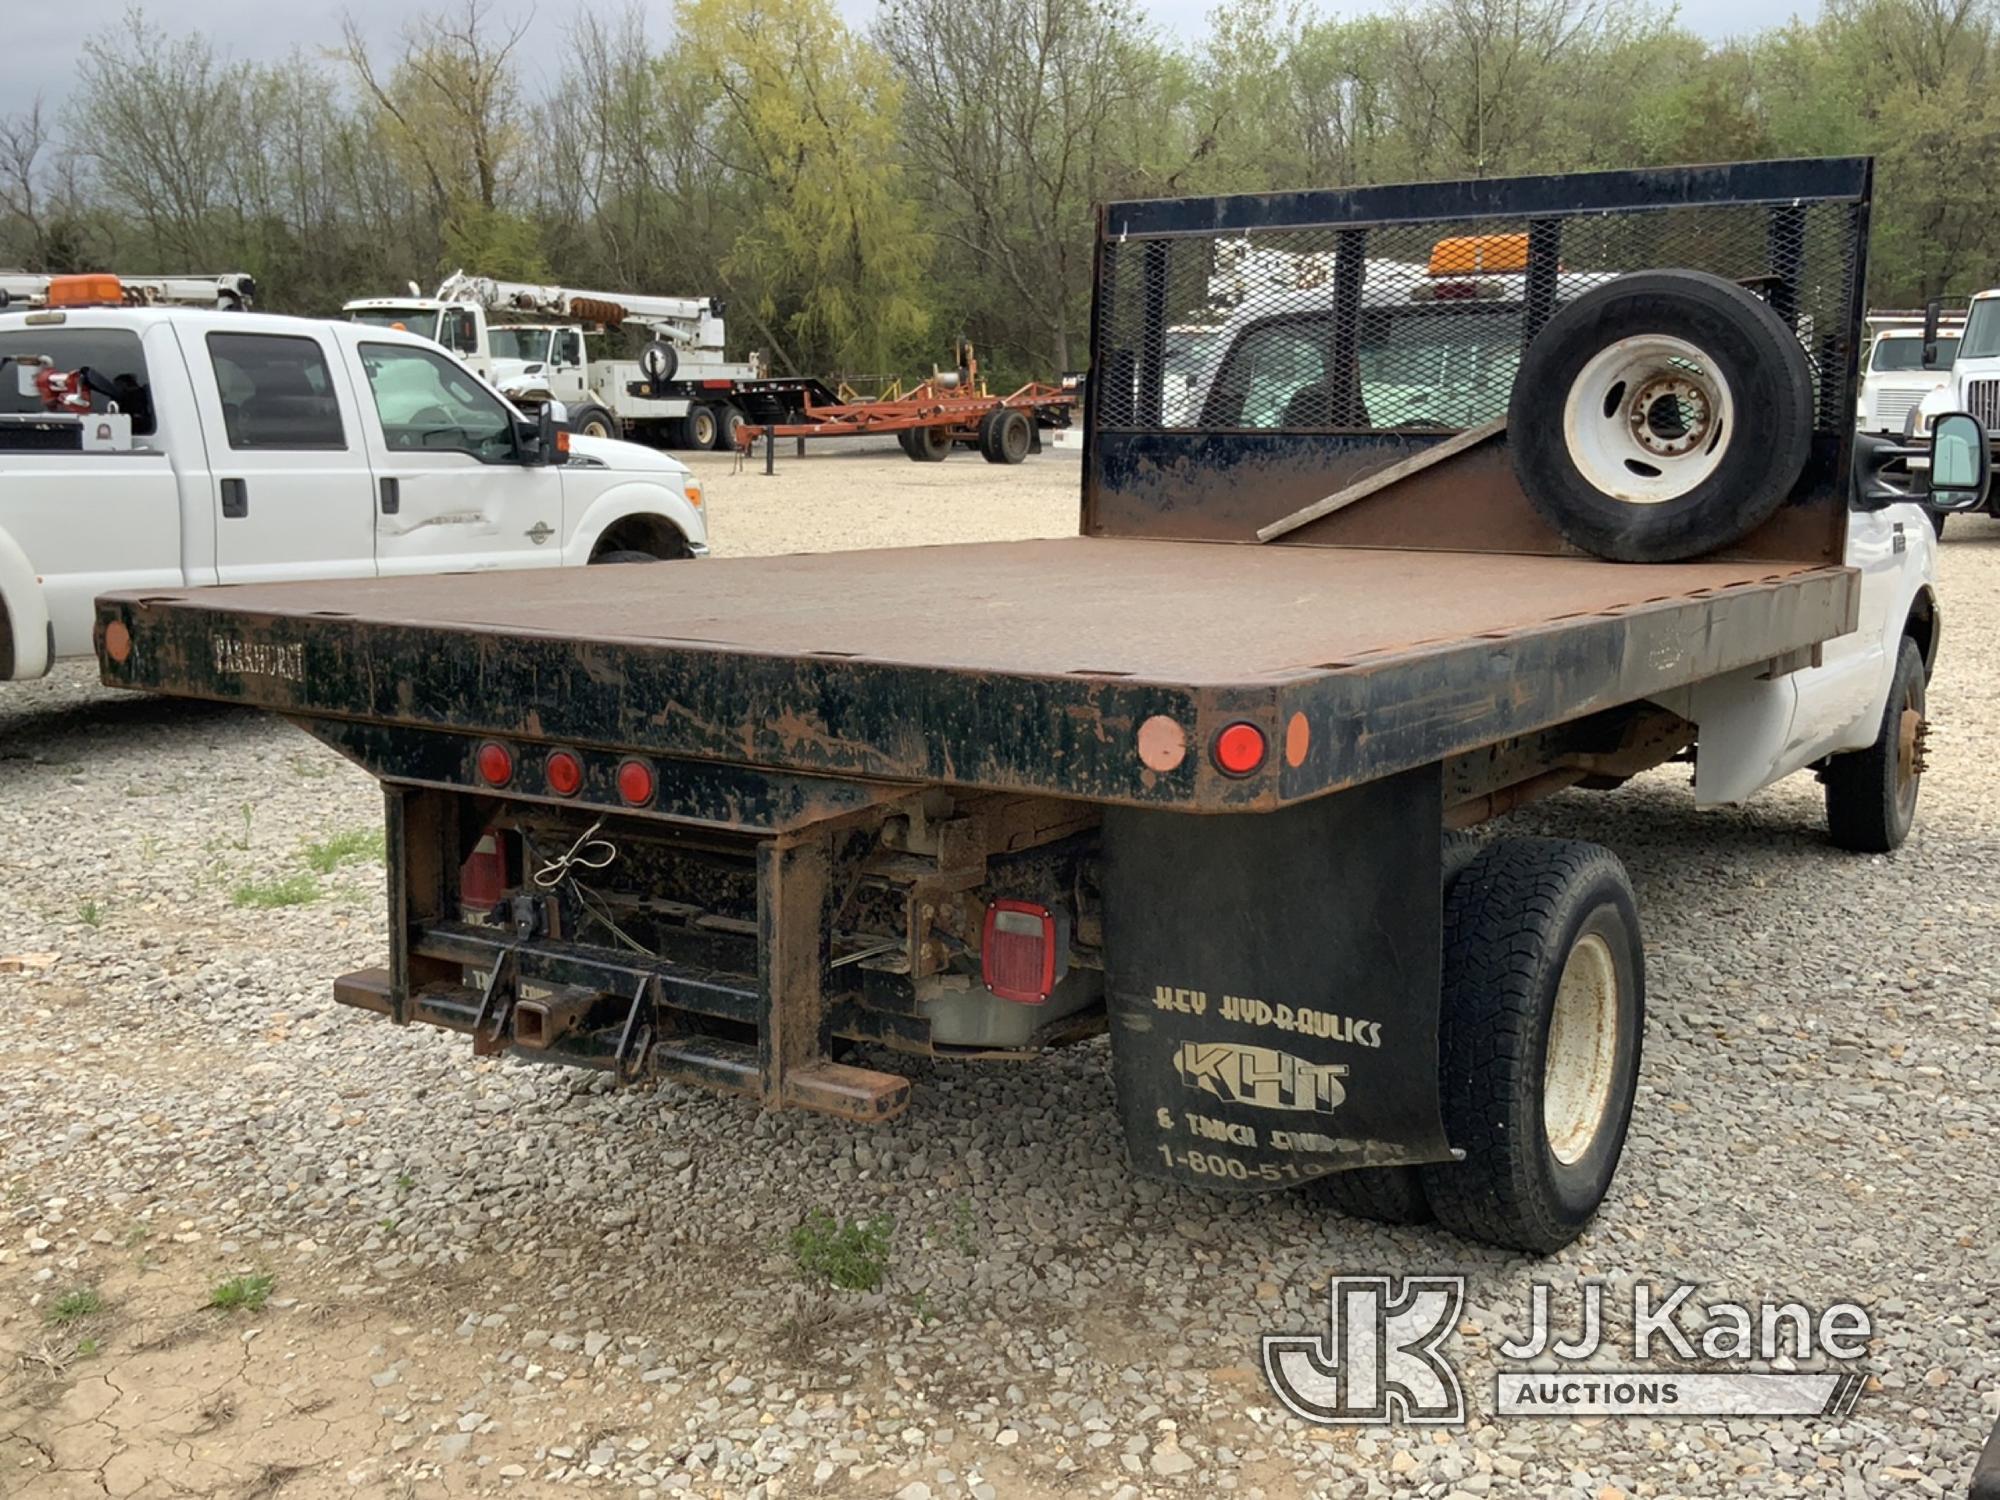 (Tipton, MO) 2002 Ford F350 4x4 Flatbed/Dump Truck Runs and Moves) (Dump Operates